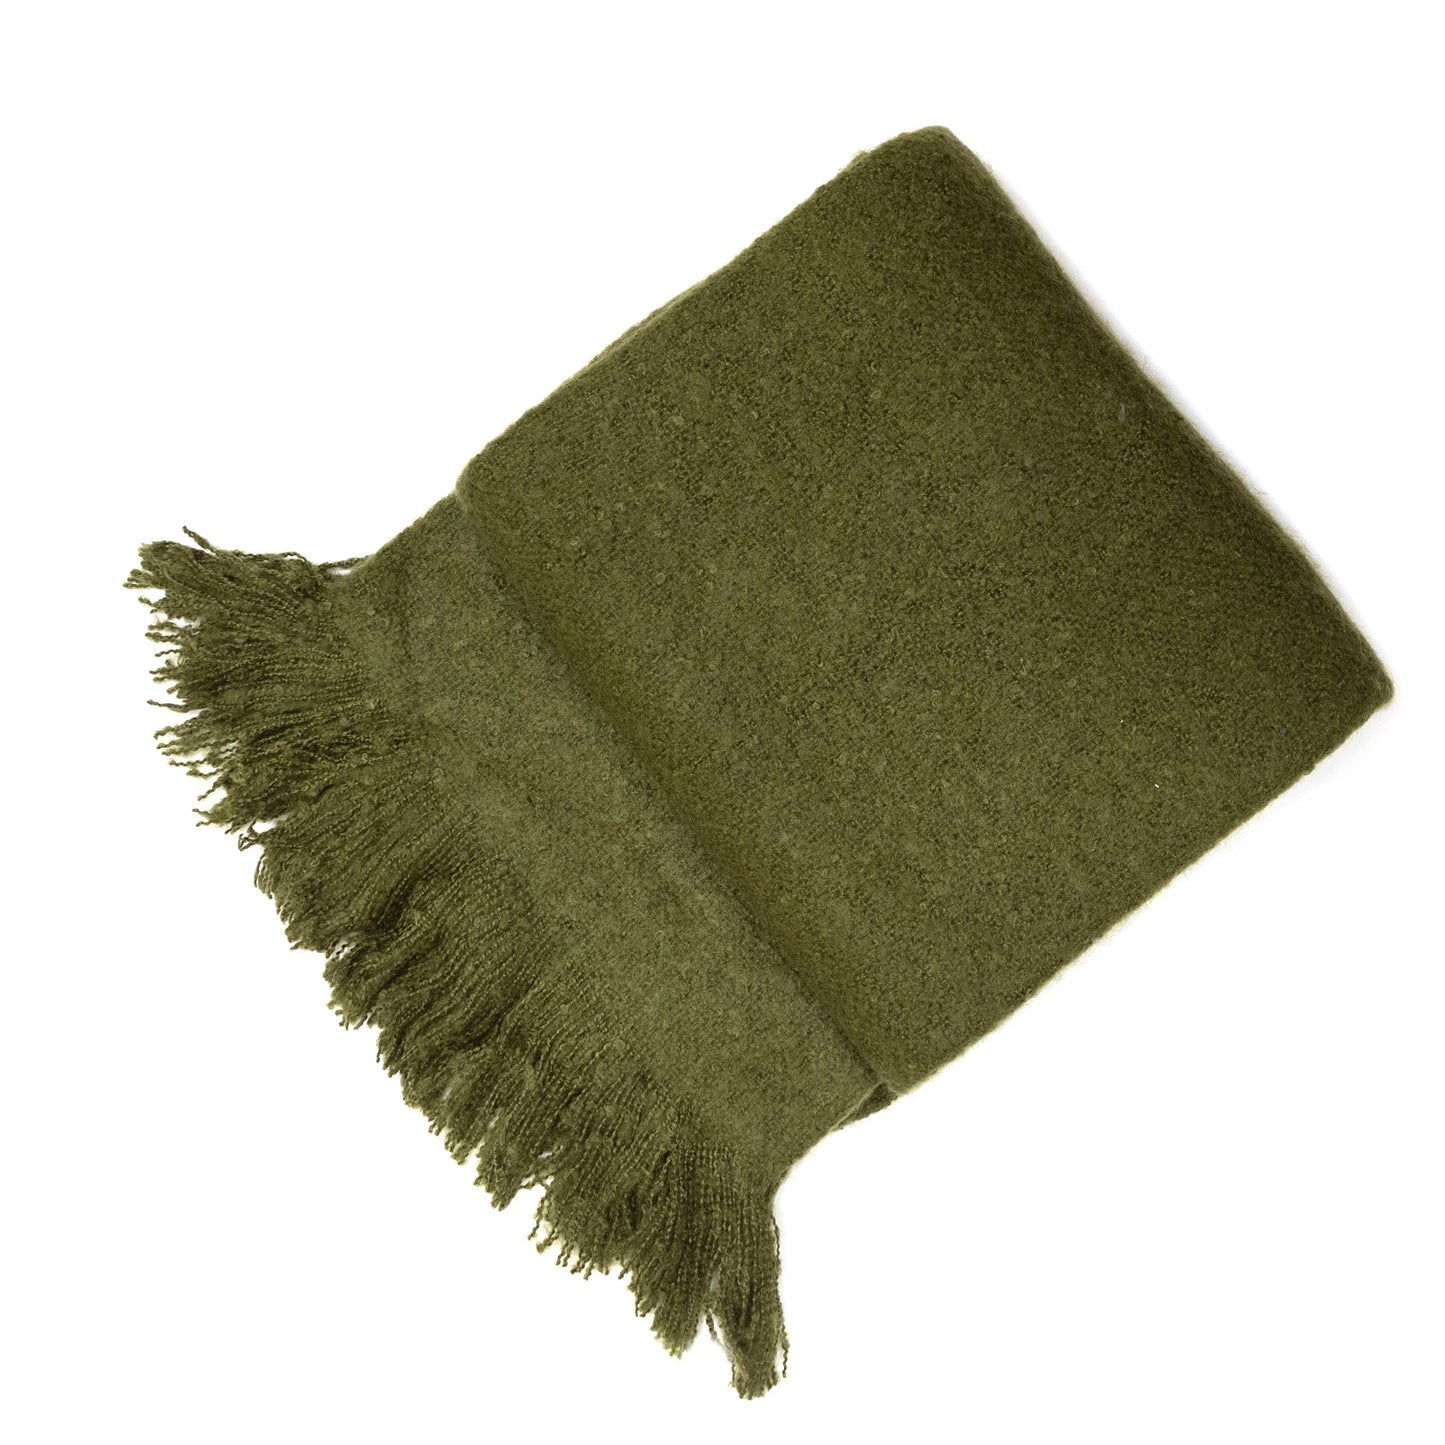 OLIVE THICK FAUX MOHAIR 130 X 180

Size: 130 X 180 cm